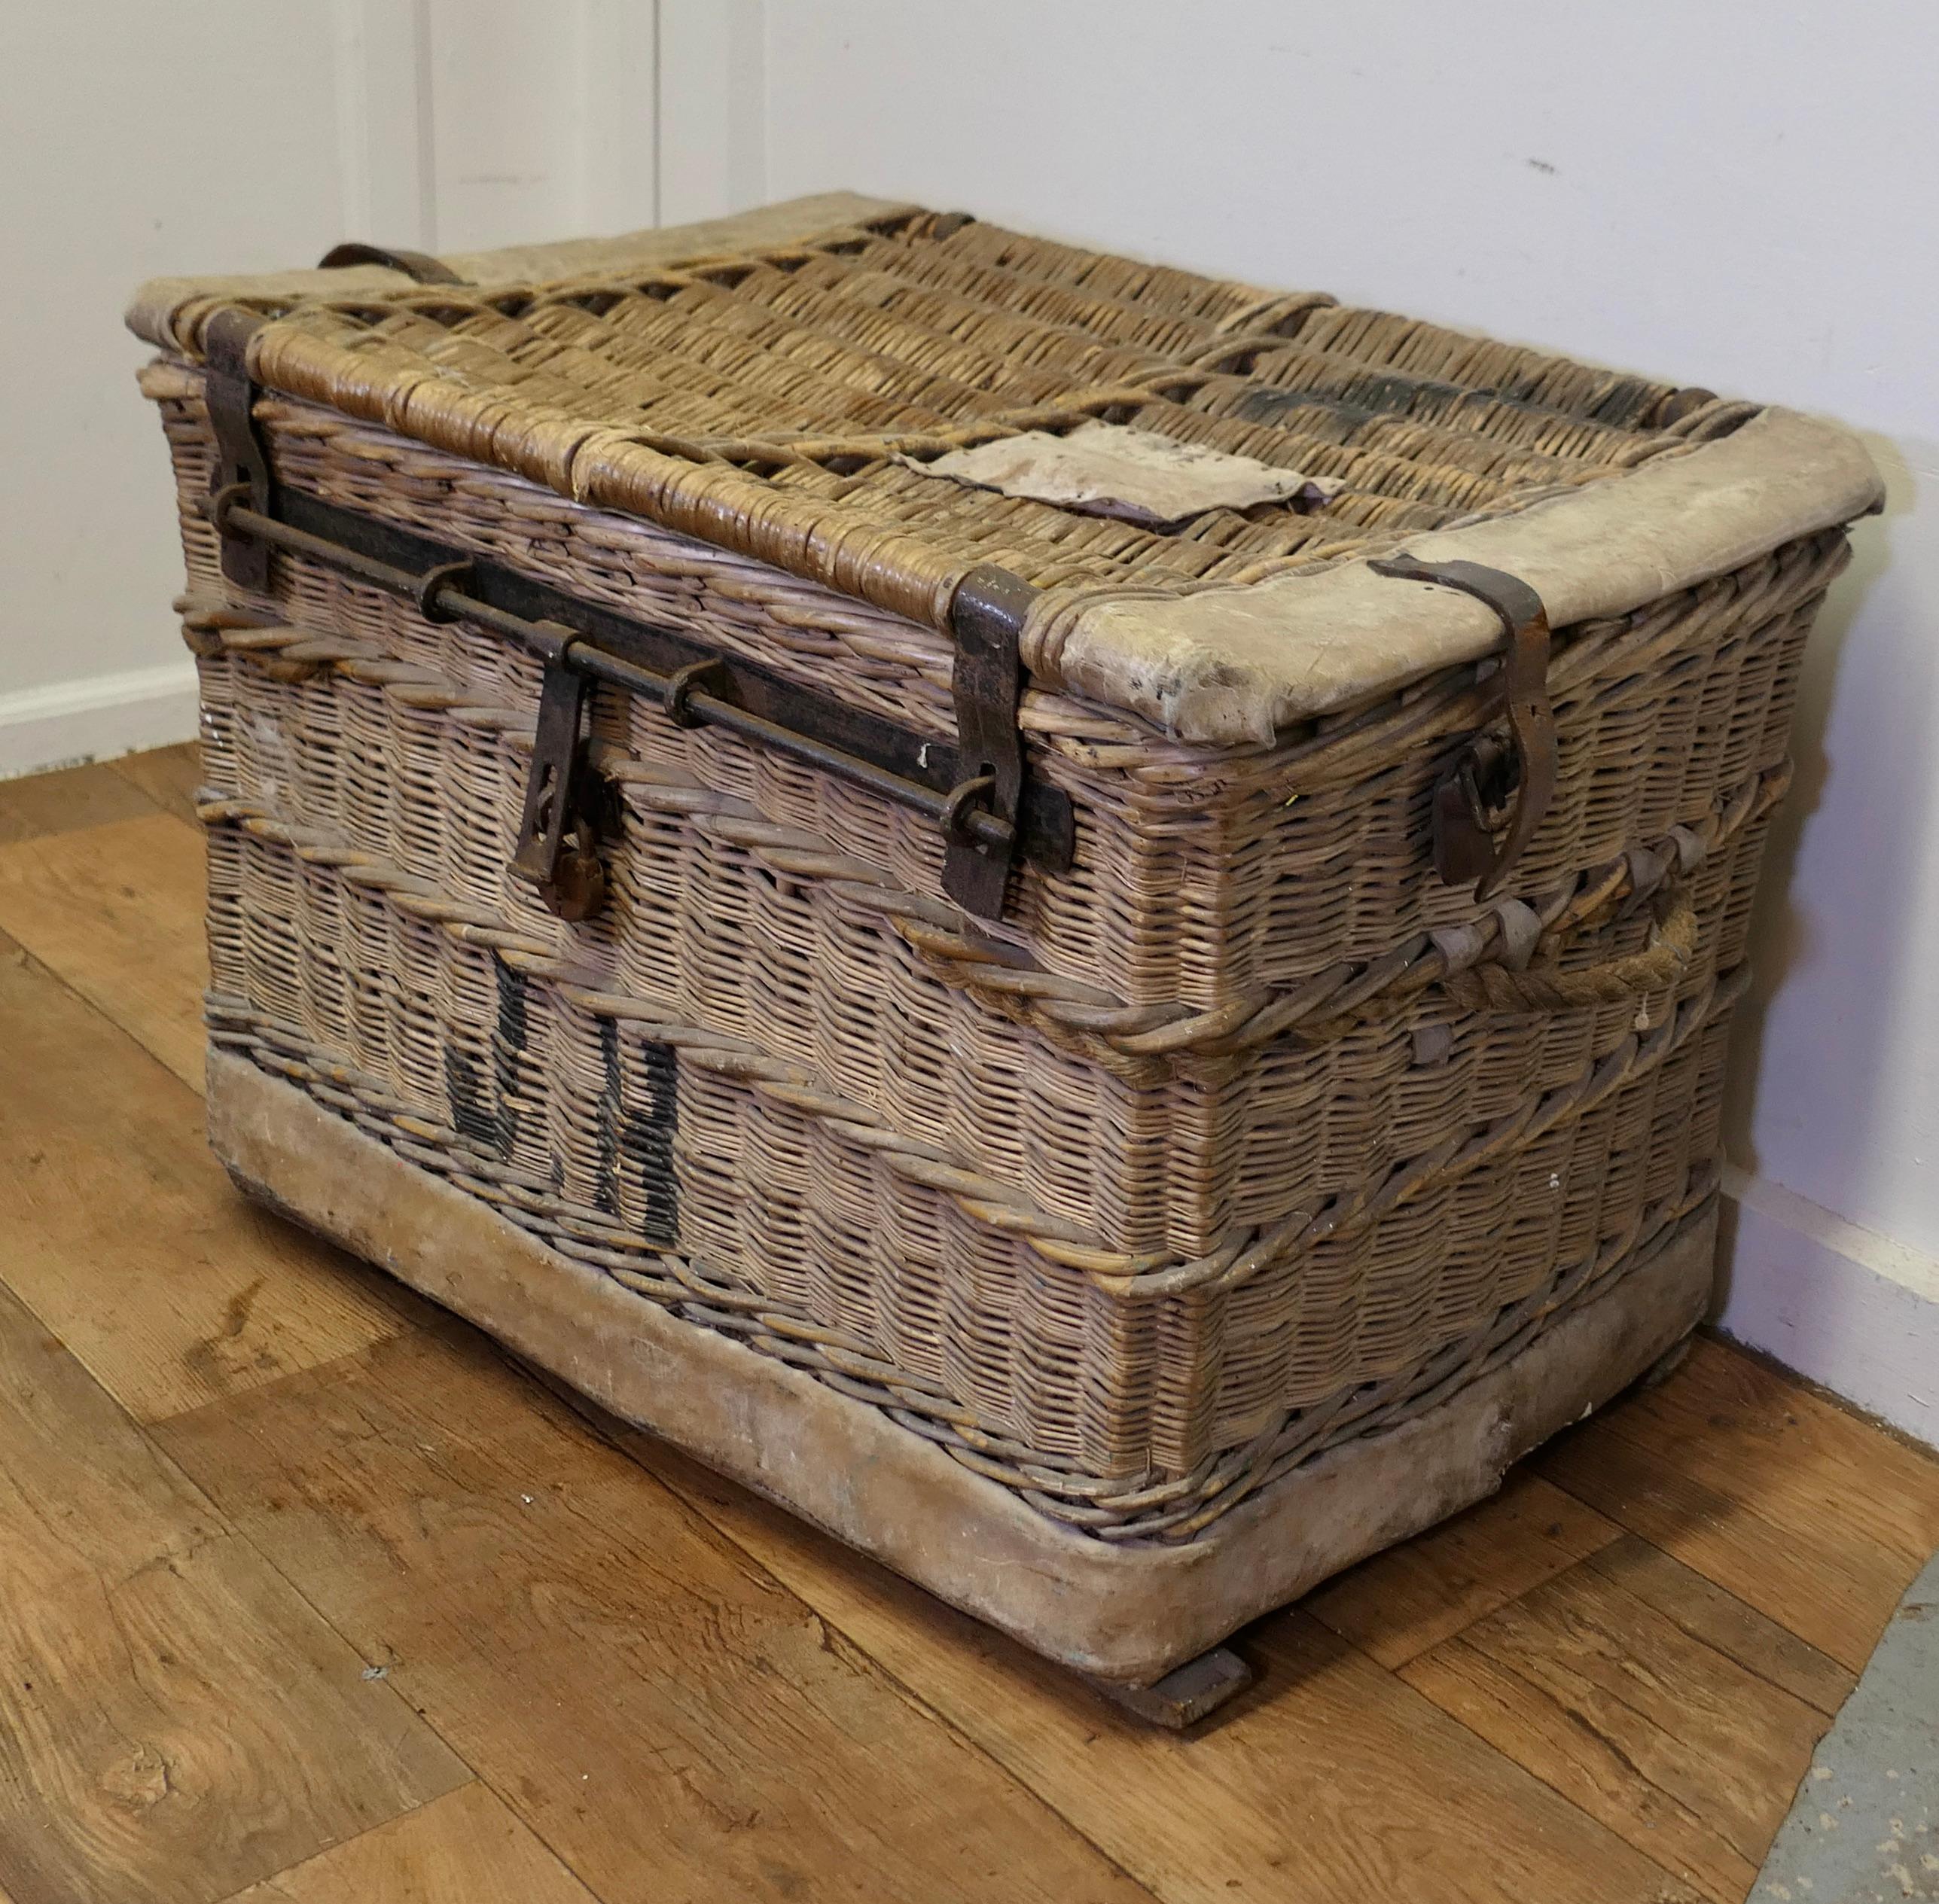 Huge Wicker Railway Parcel Hamper
Very strong and attractive piece, in good complete condition, with the original iron locking clasp, hide corners and rope carrying handles as the interior is lined in green felt it is safe to assume that the hamper